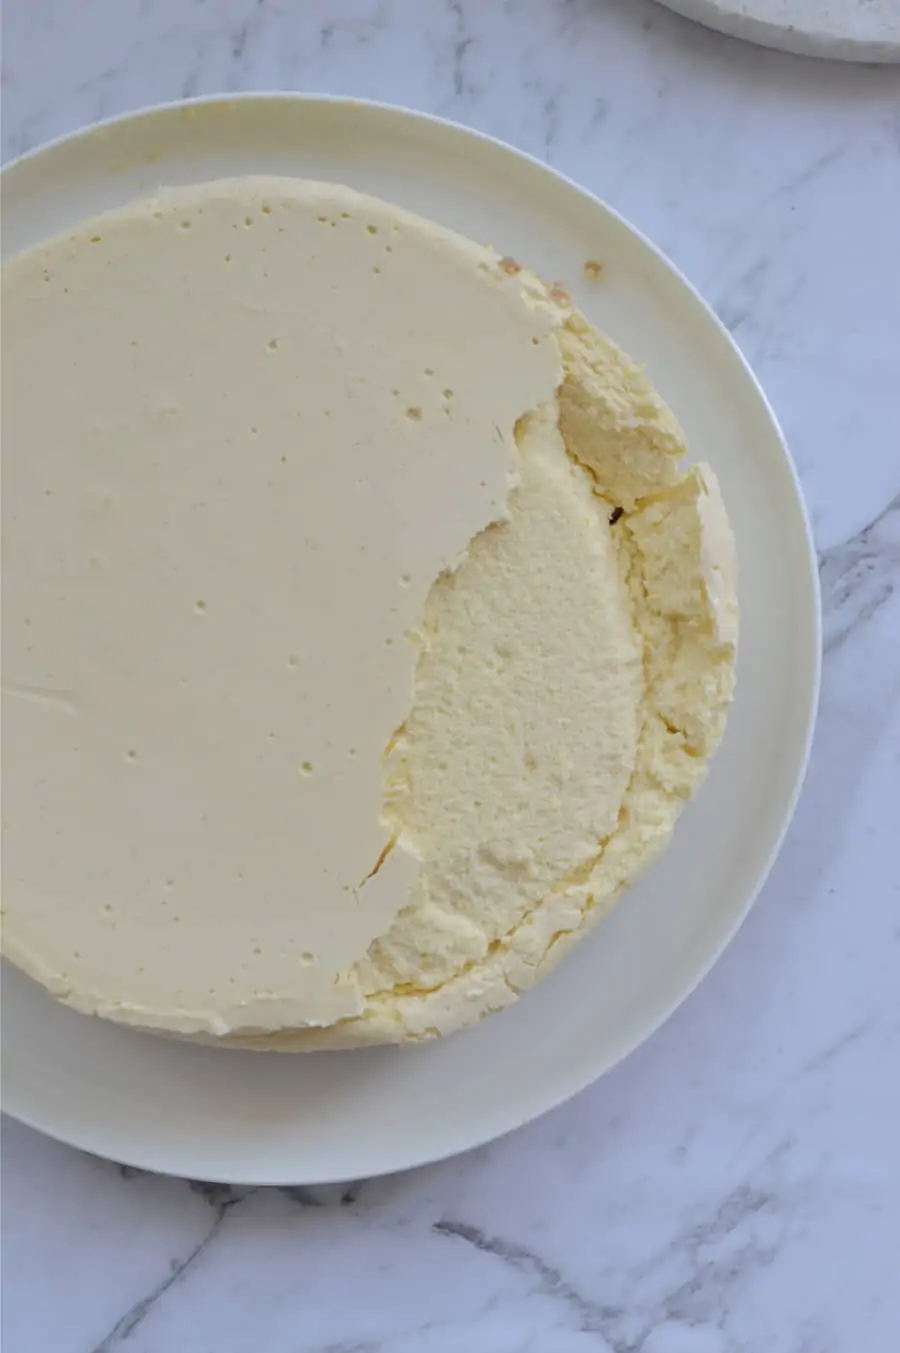 A cheesecake on a plate. One side has collapsed